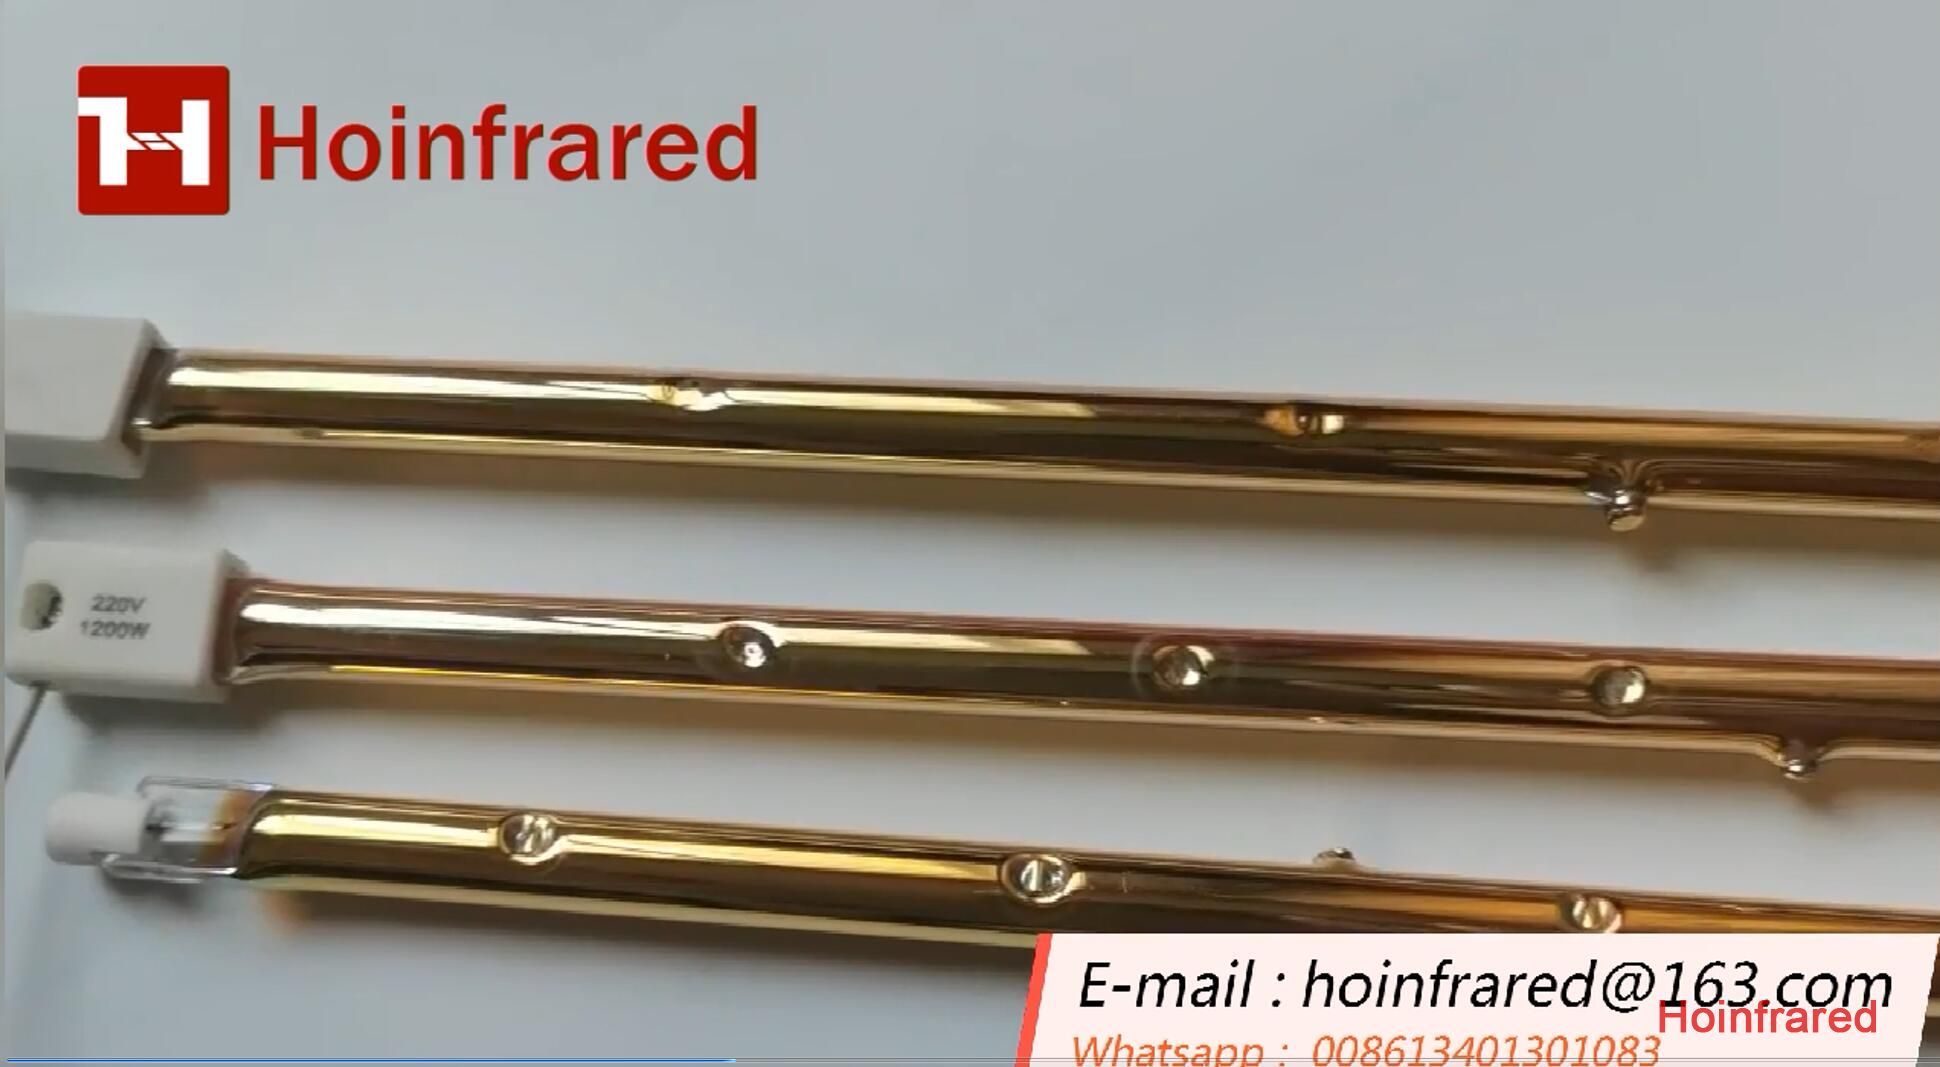 Hoinfrared infrared heating lamps